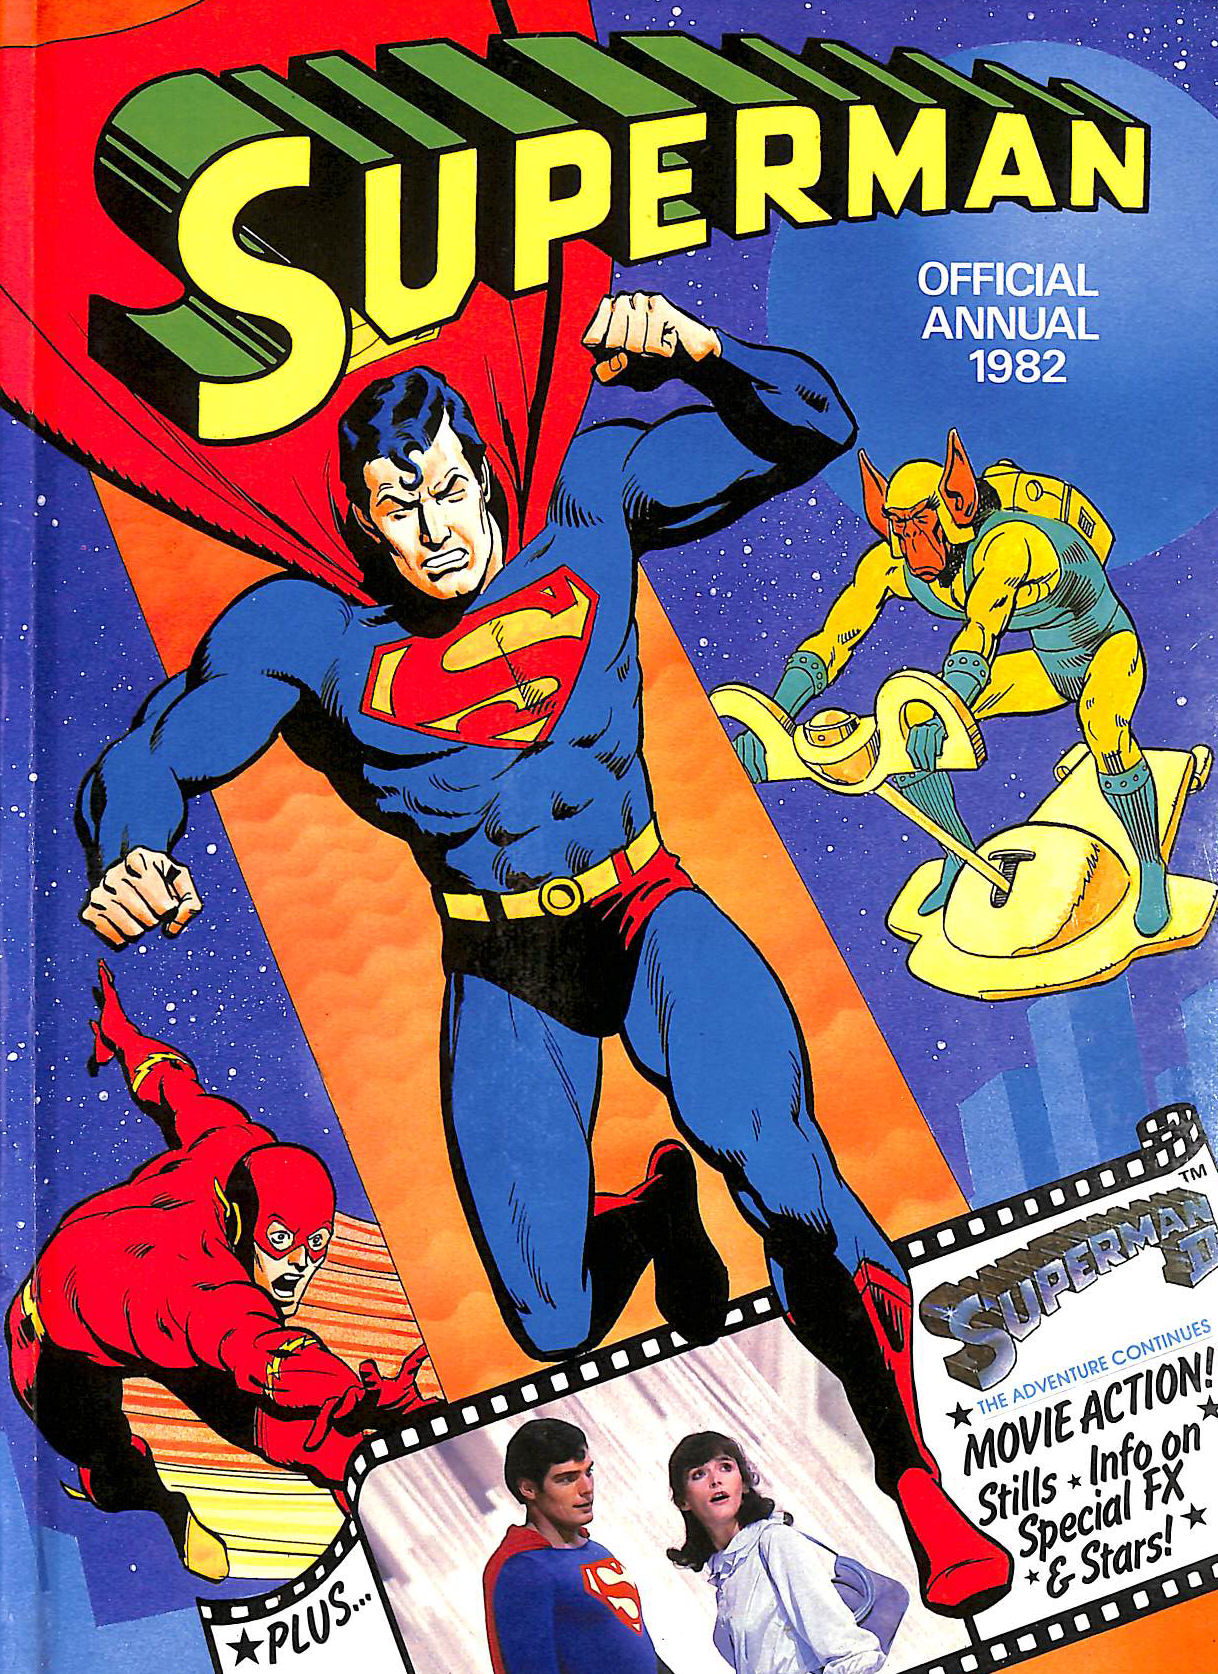 ANON - Superman Official Annual 1982